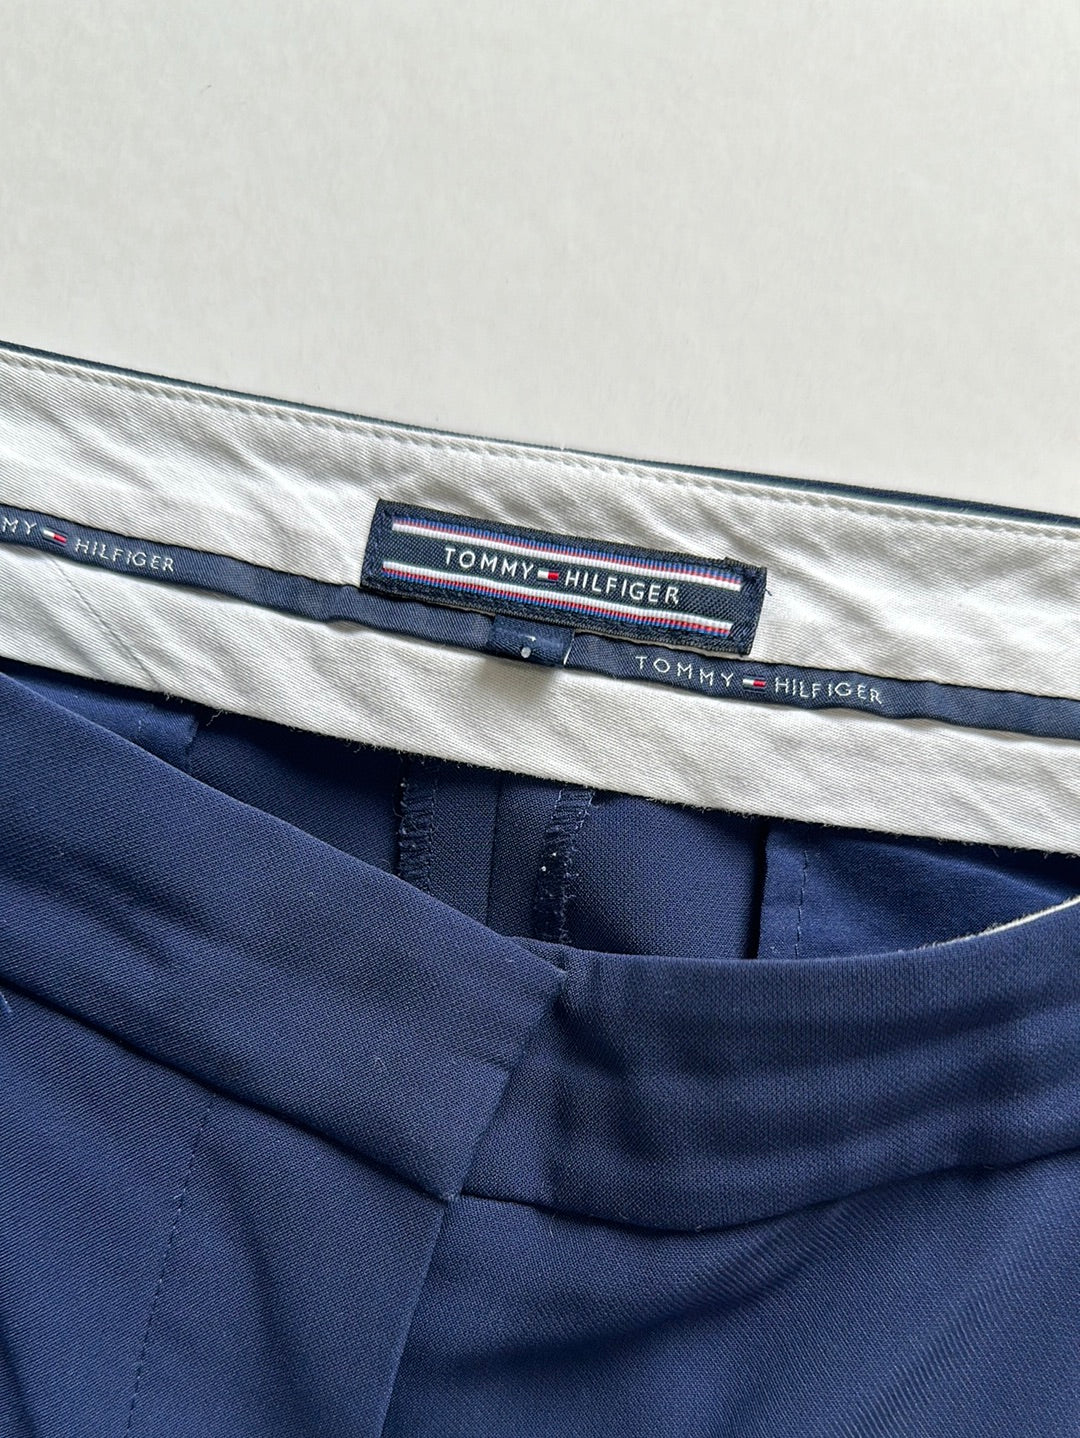 Tommy Hilfiger | New York | pants | size 8 | tapered leg